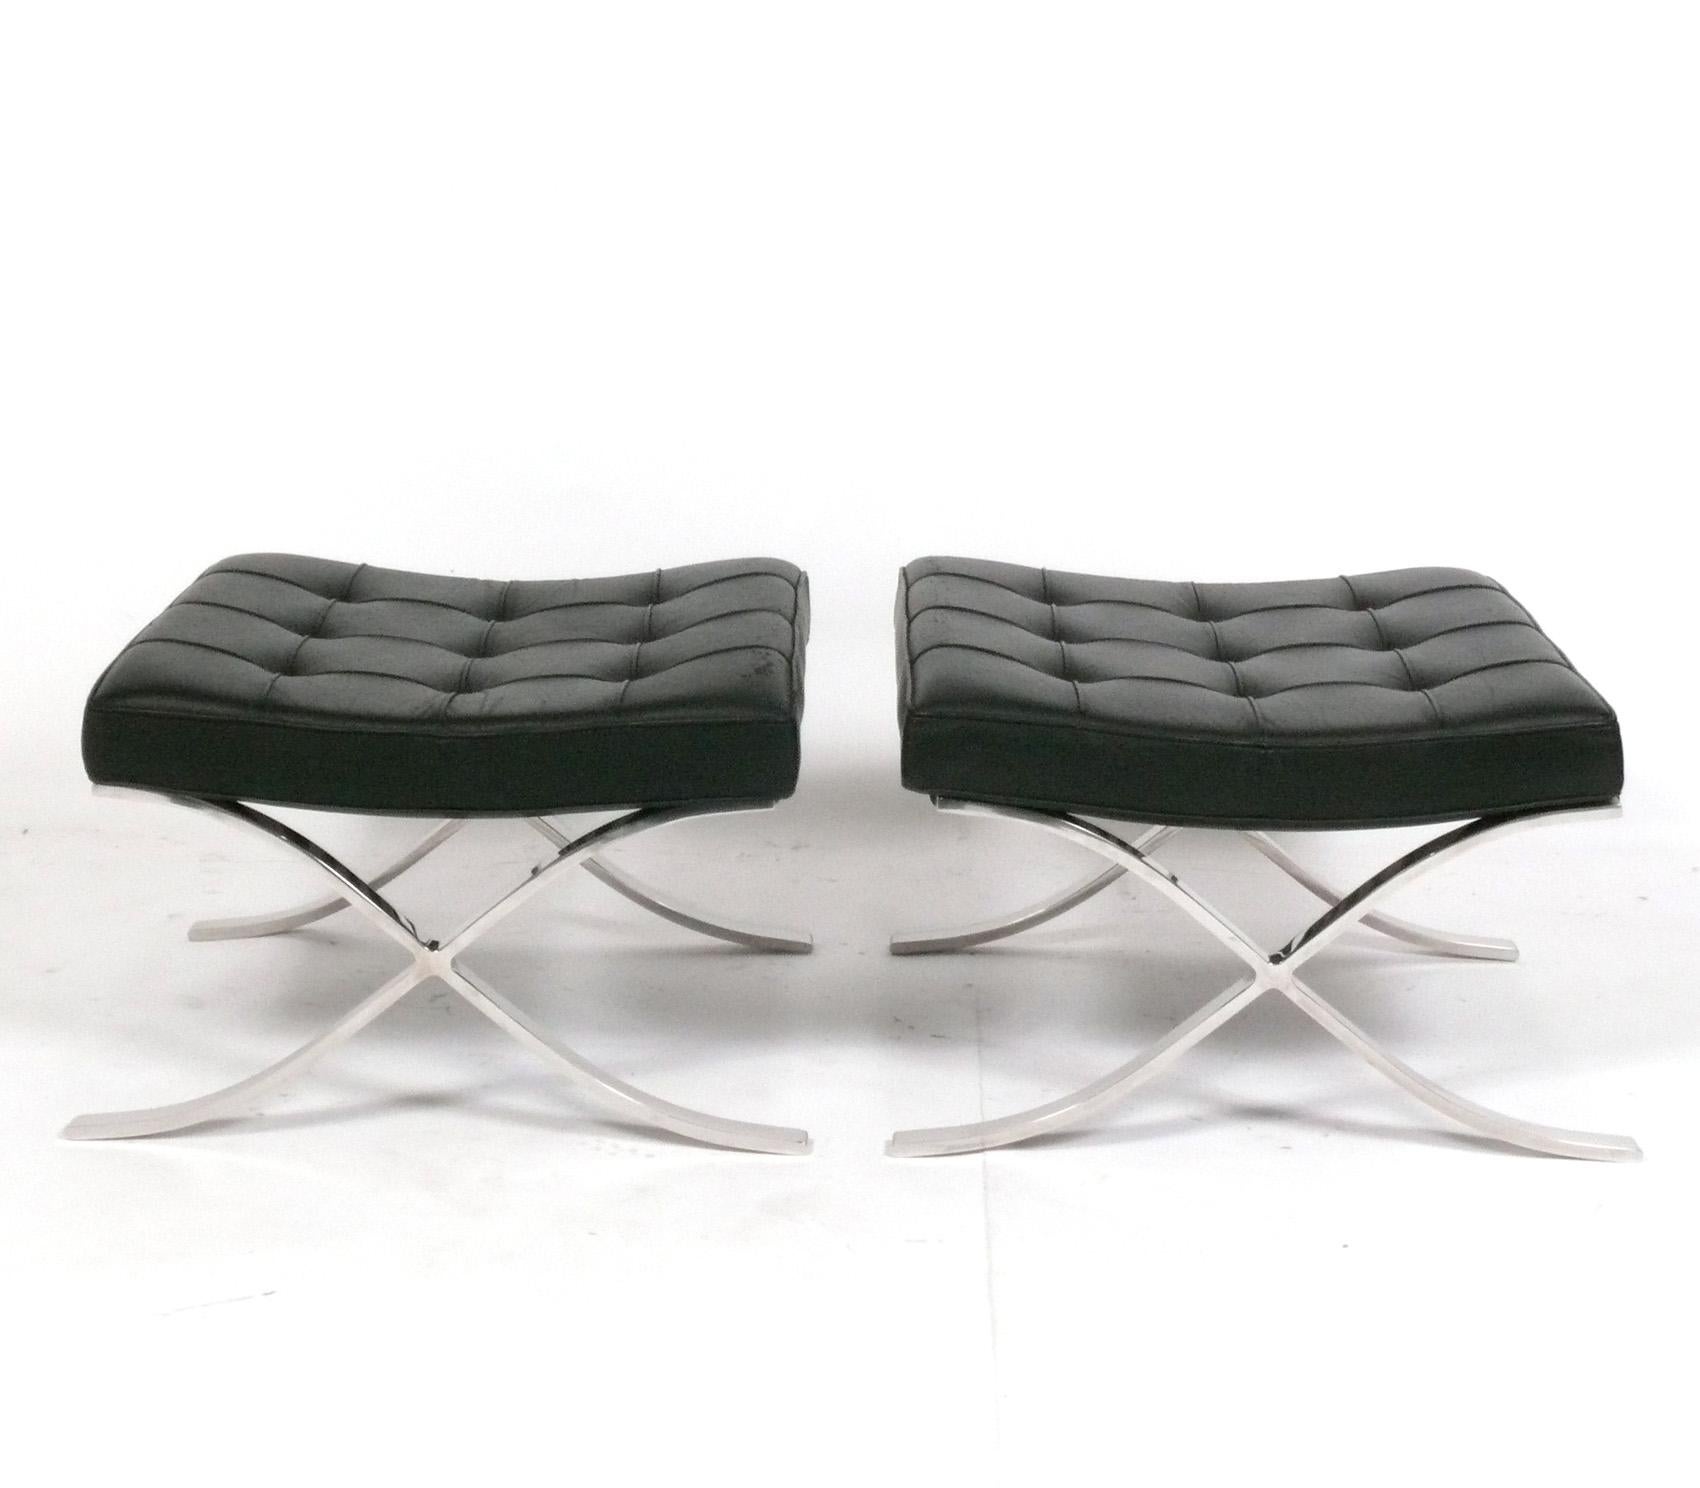 American Mies van der Rohe for Knoll Barcelona Ottomans circa 1979 Pair Available For Sale